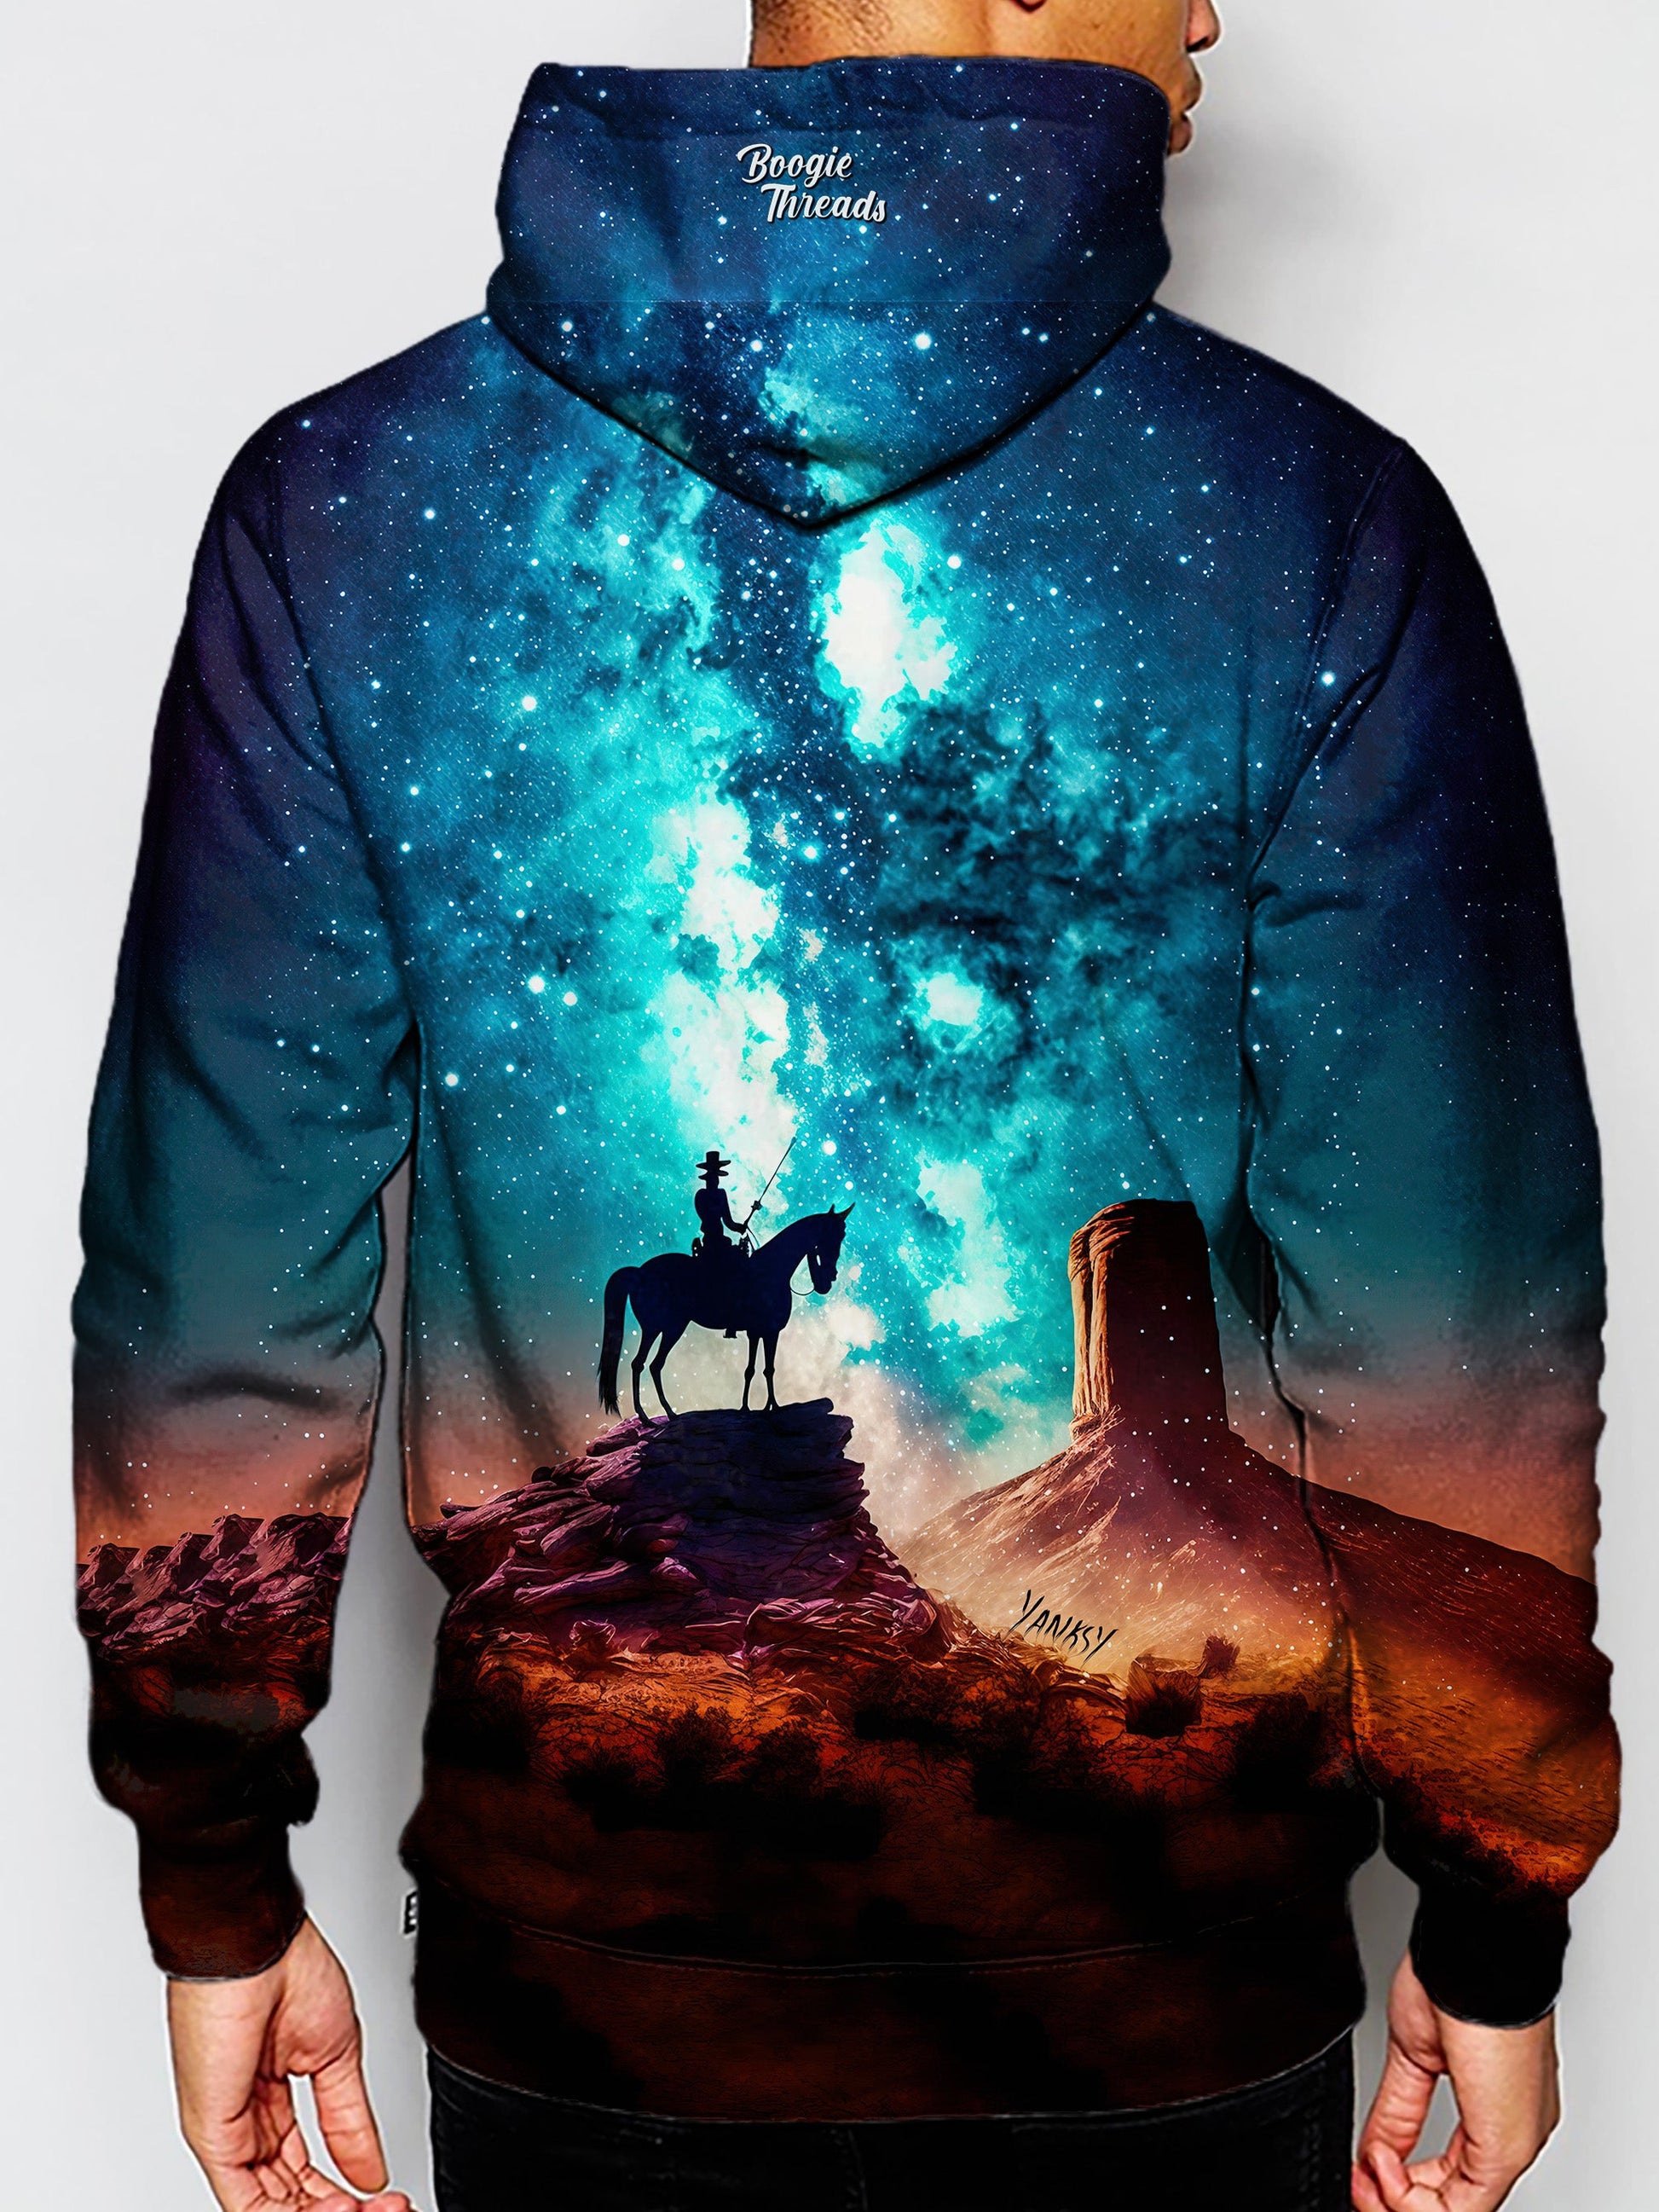 Get lost in the mesmerizing patterns and colors of this psychedelic sublimation pullover hoodie